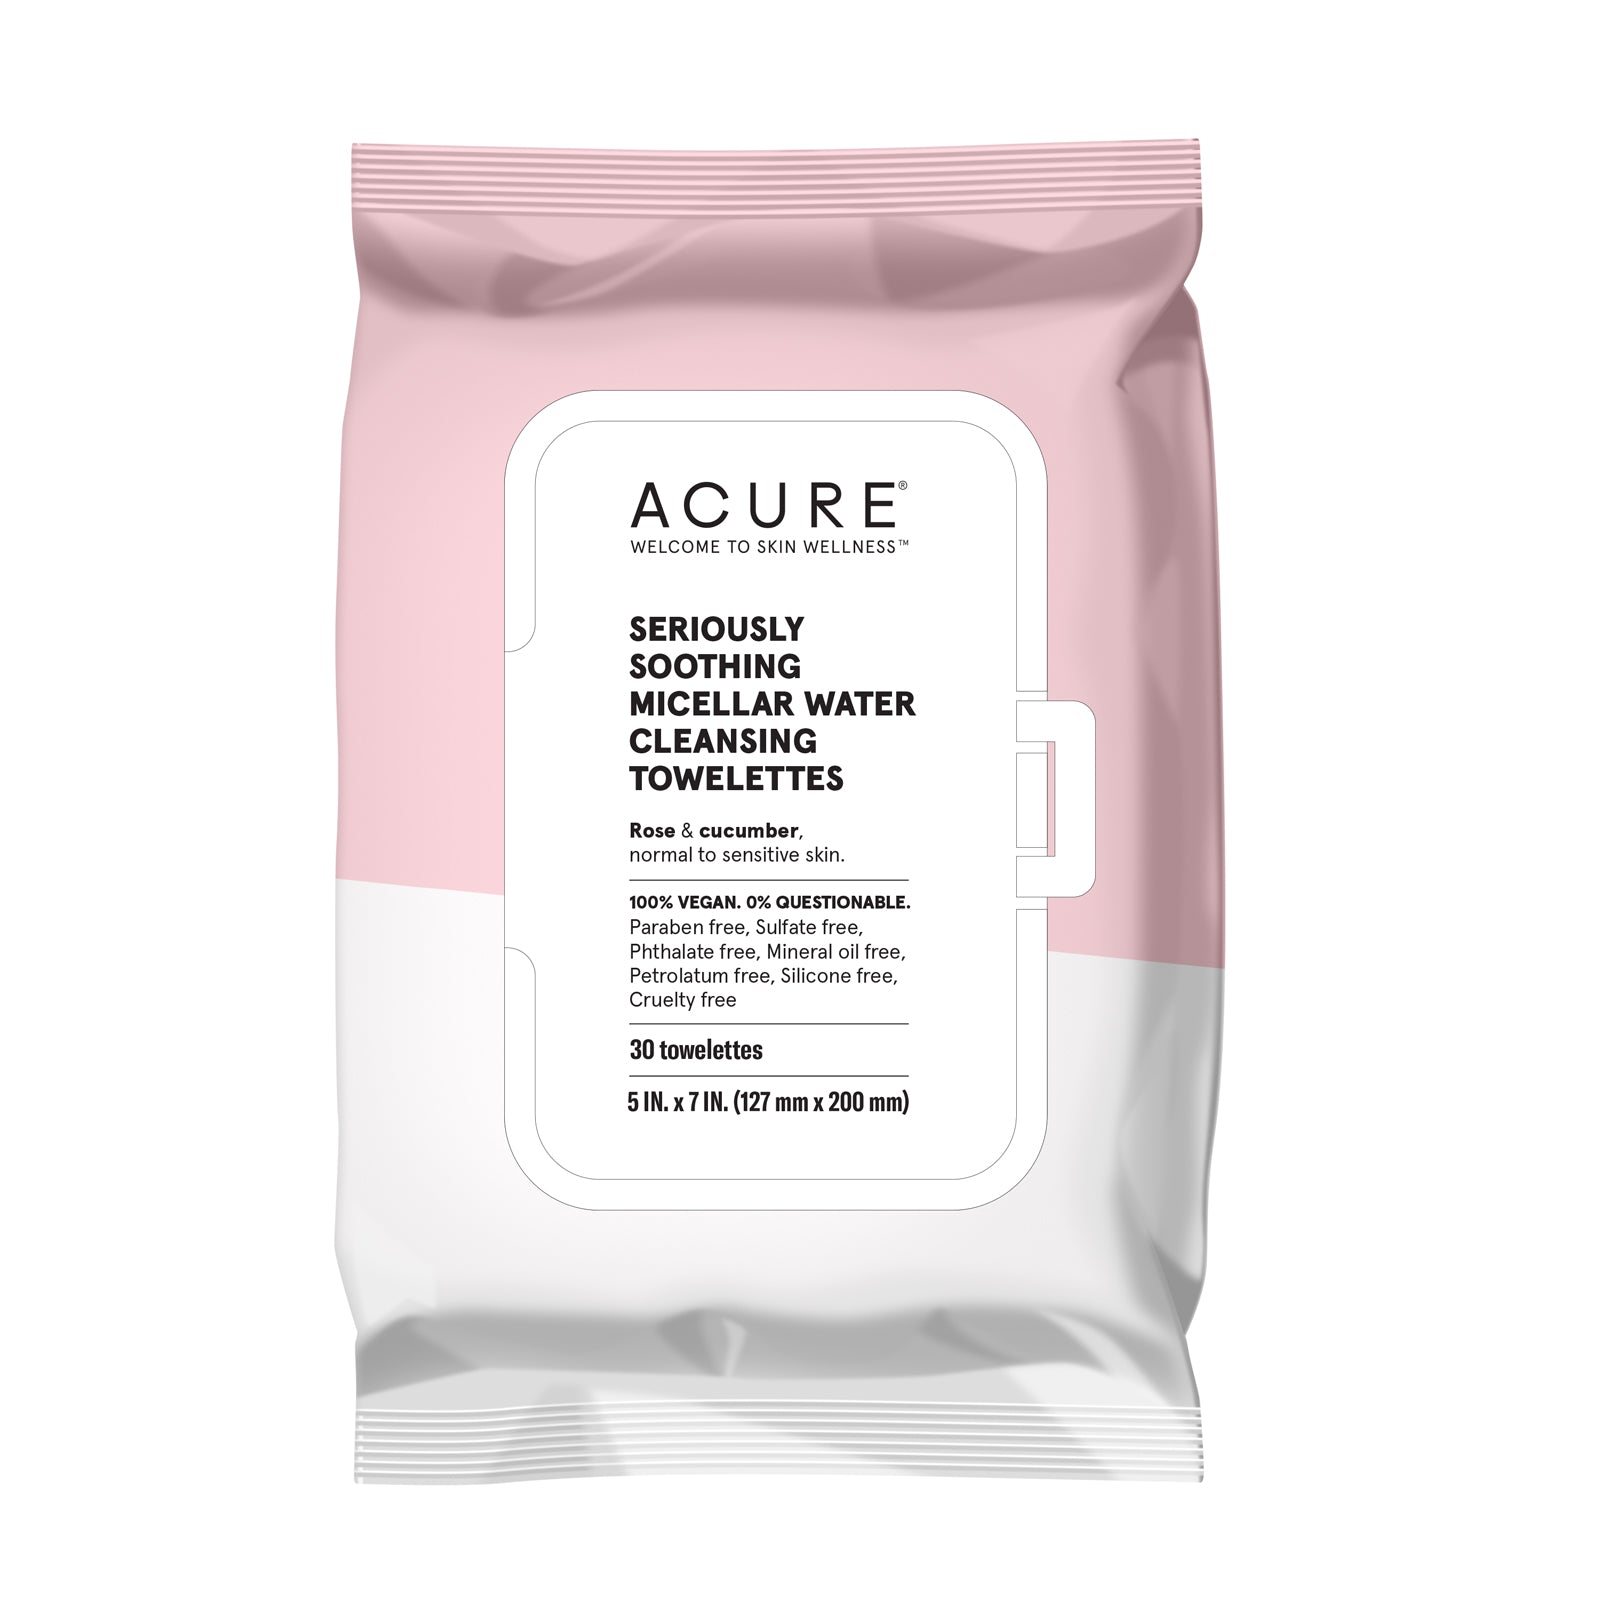 ACURE - Seriously Soothing Micellar Water Towelettes - ProCare Outlet by Acure